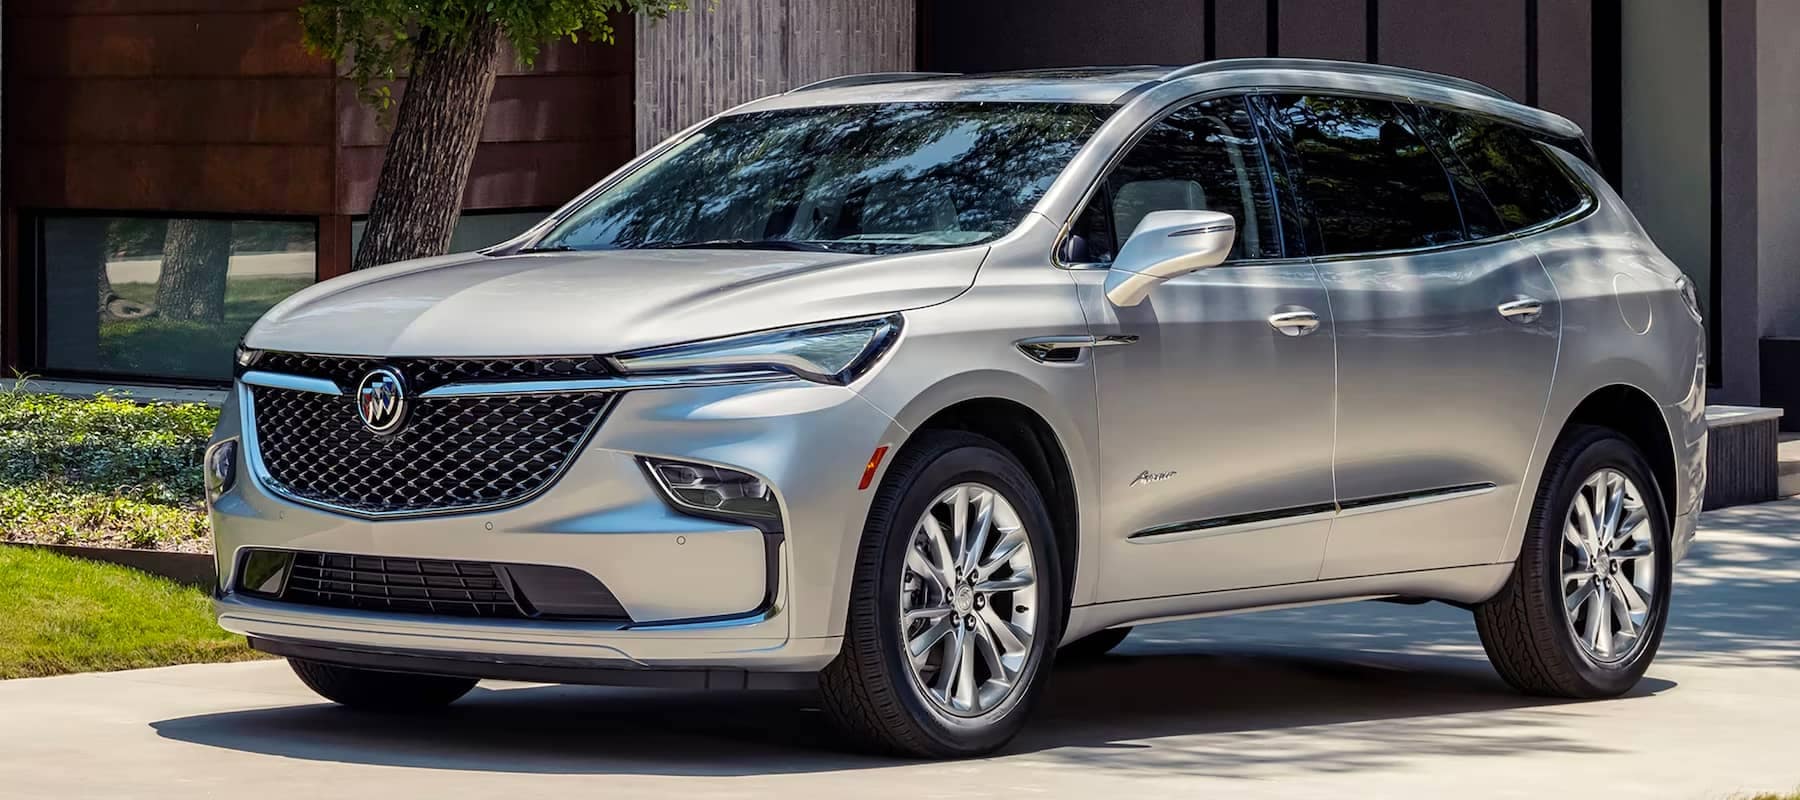 2023 Buick Enclave parked outside a home